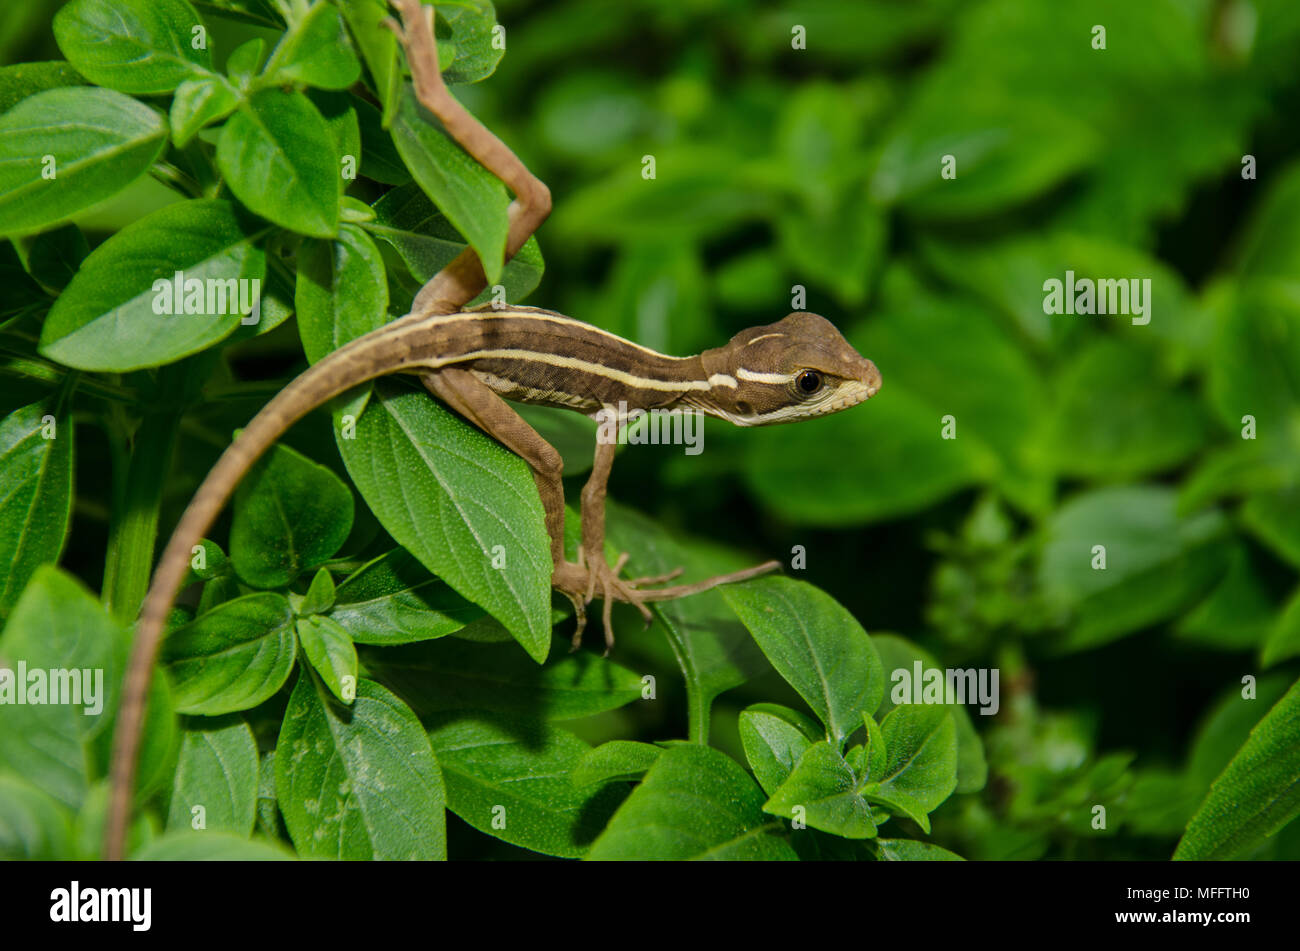 Reptile of the mexican fauna in the leaves of a plant Stock Photo